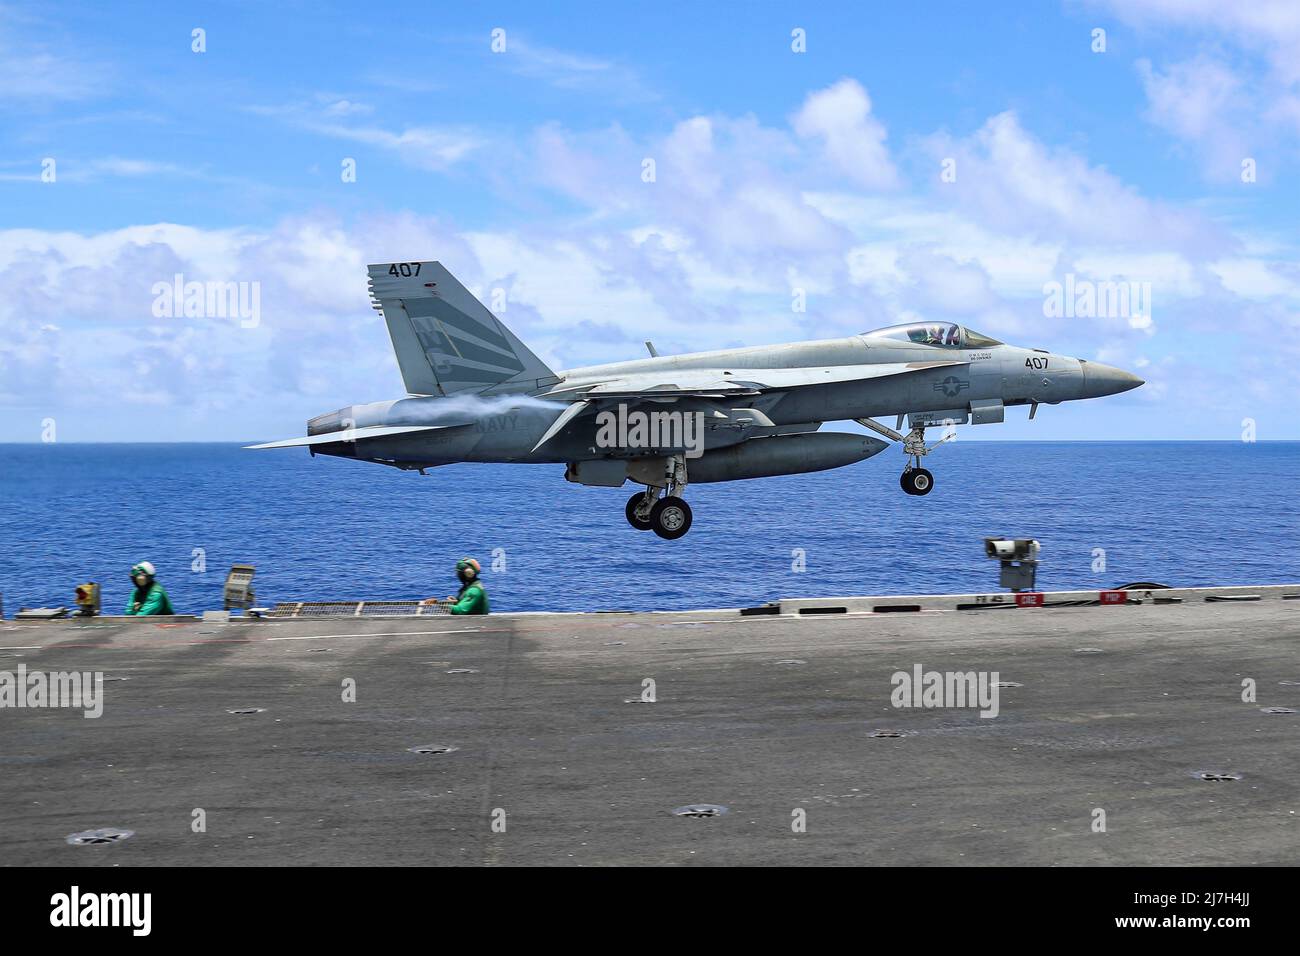 Philippine Sea, United States. 08 May, 2022. A U.S. Navy F/A-18E Super Hornet fighter aircraft, assigned to the Vigilantes of Strike Fighter Squadron 151, launches off the flight deck of the aircraft carrier USS Abraham Lincoln during routine patrol May 4, 2022 in the Philippine Sea.  Credit: MC3 Javier Reyes/U.S. Navy Photo/Alamy Live News Stock Photo